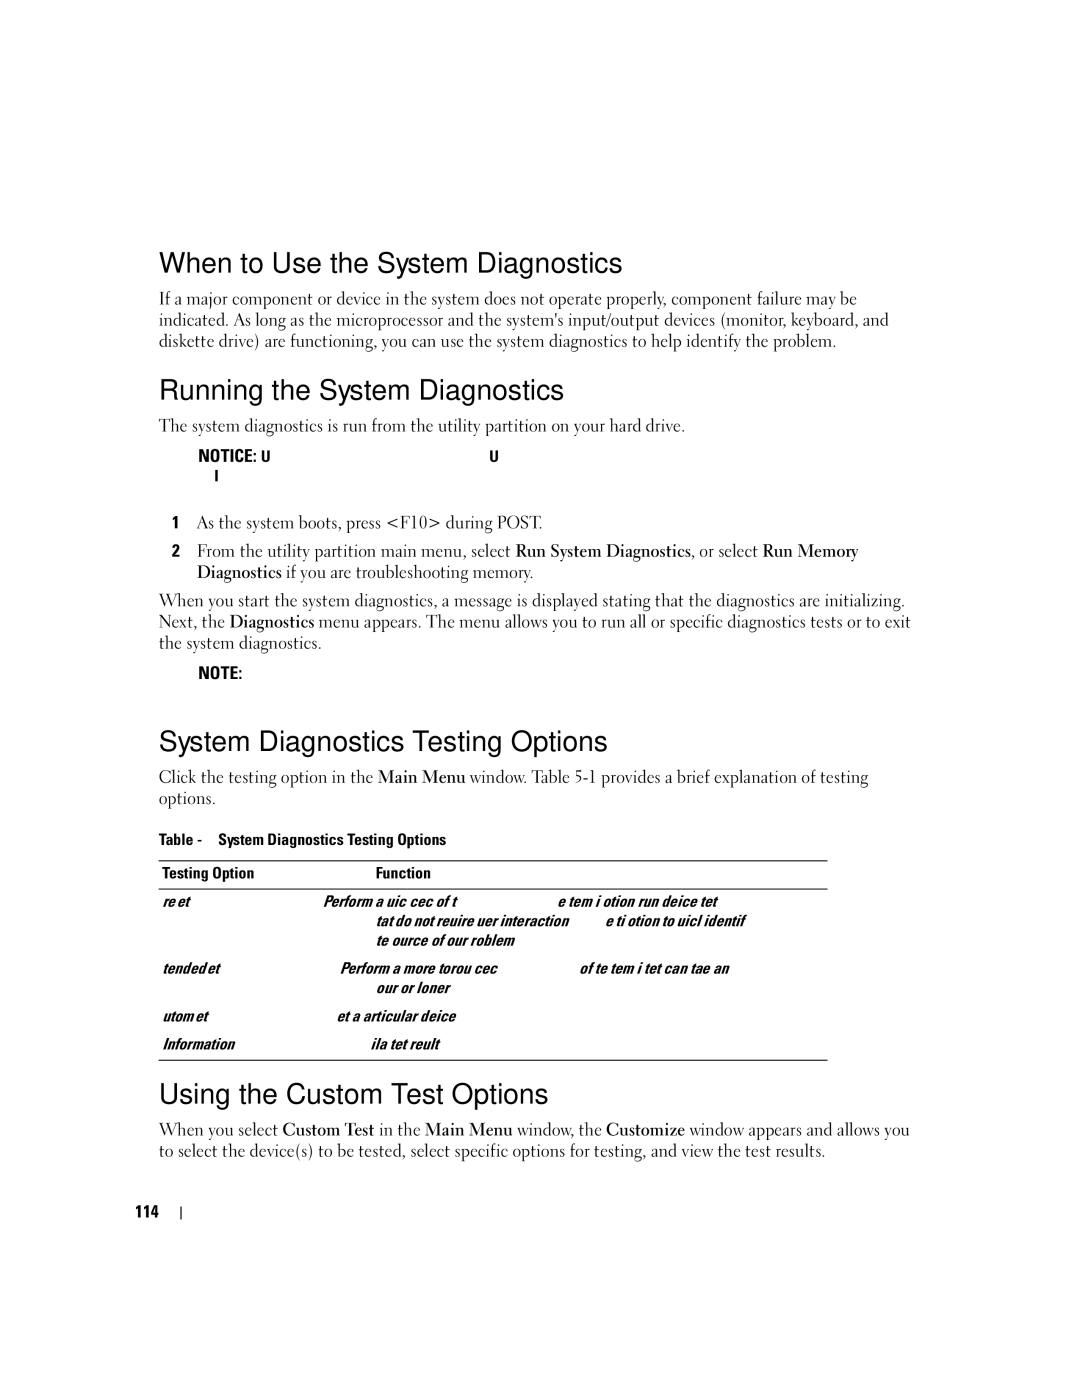 Dell SC1430 When to Use the System Diagnostics, Running the System Diagnostics, System Diagnostics Testing Options, 114 